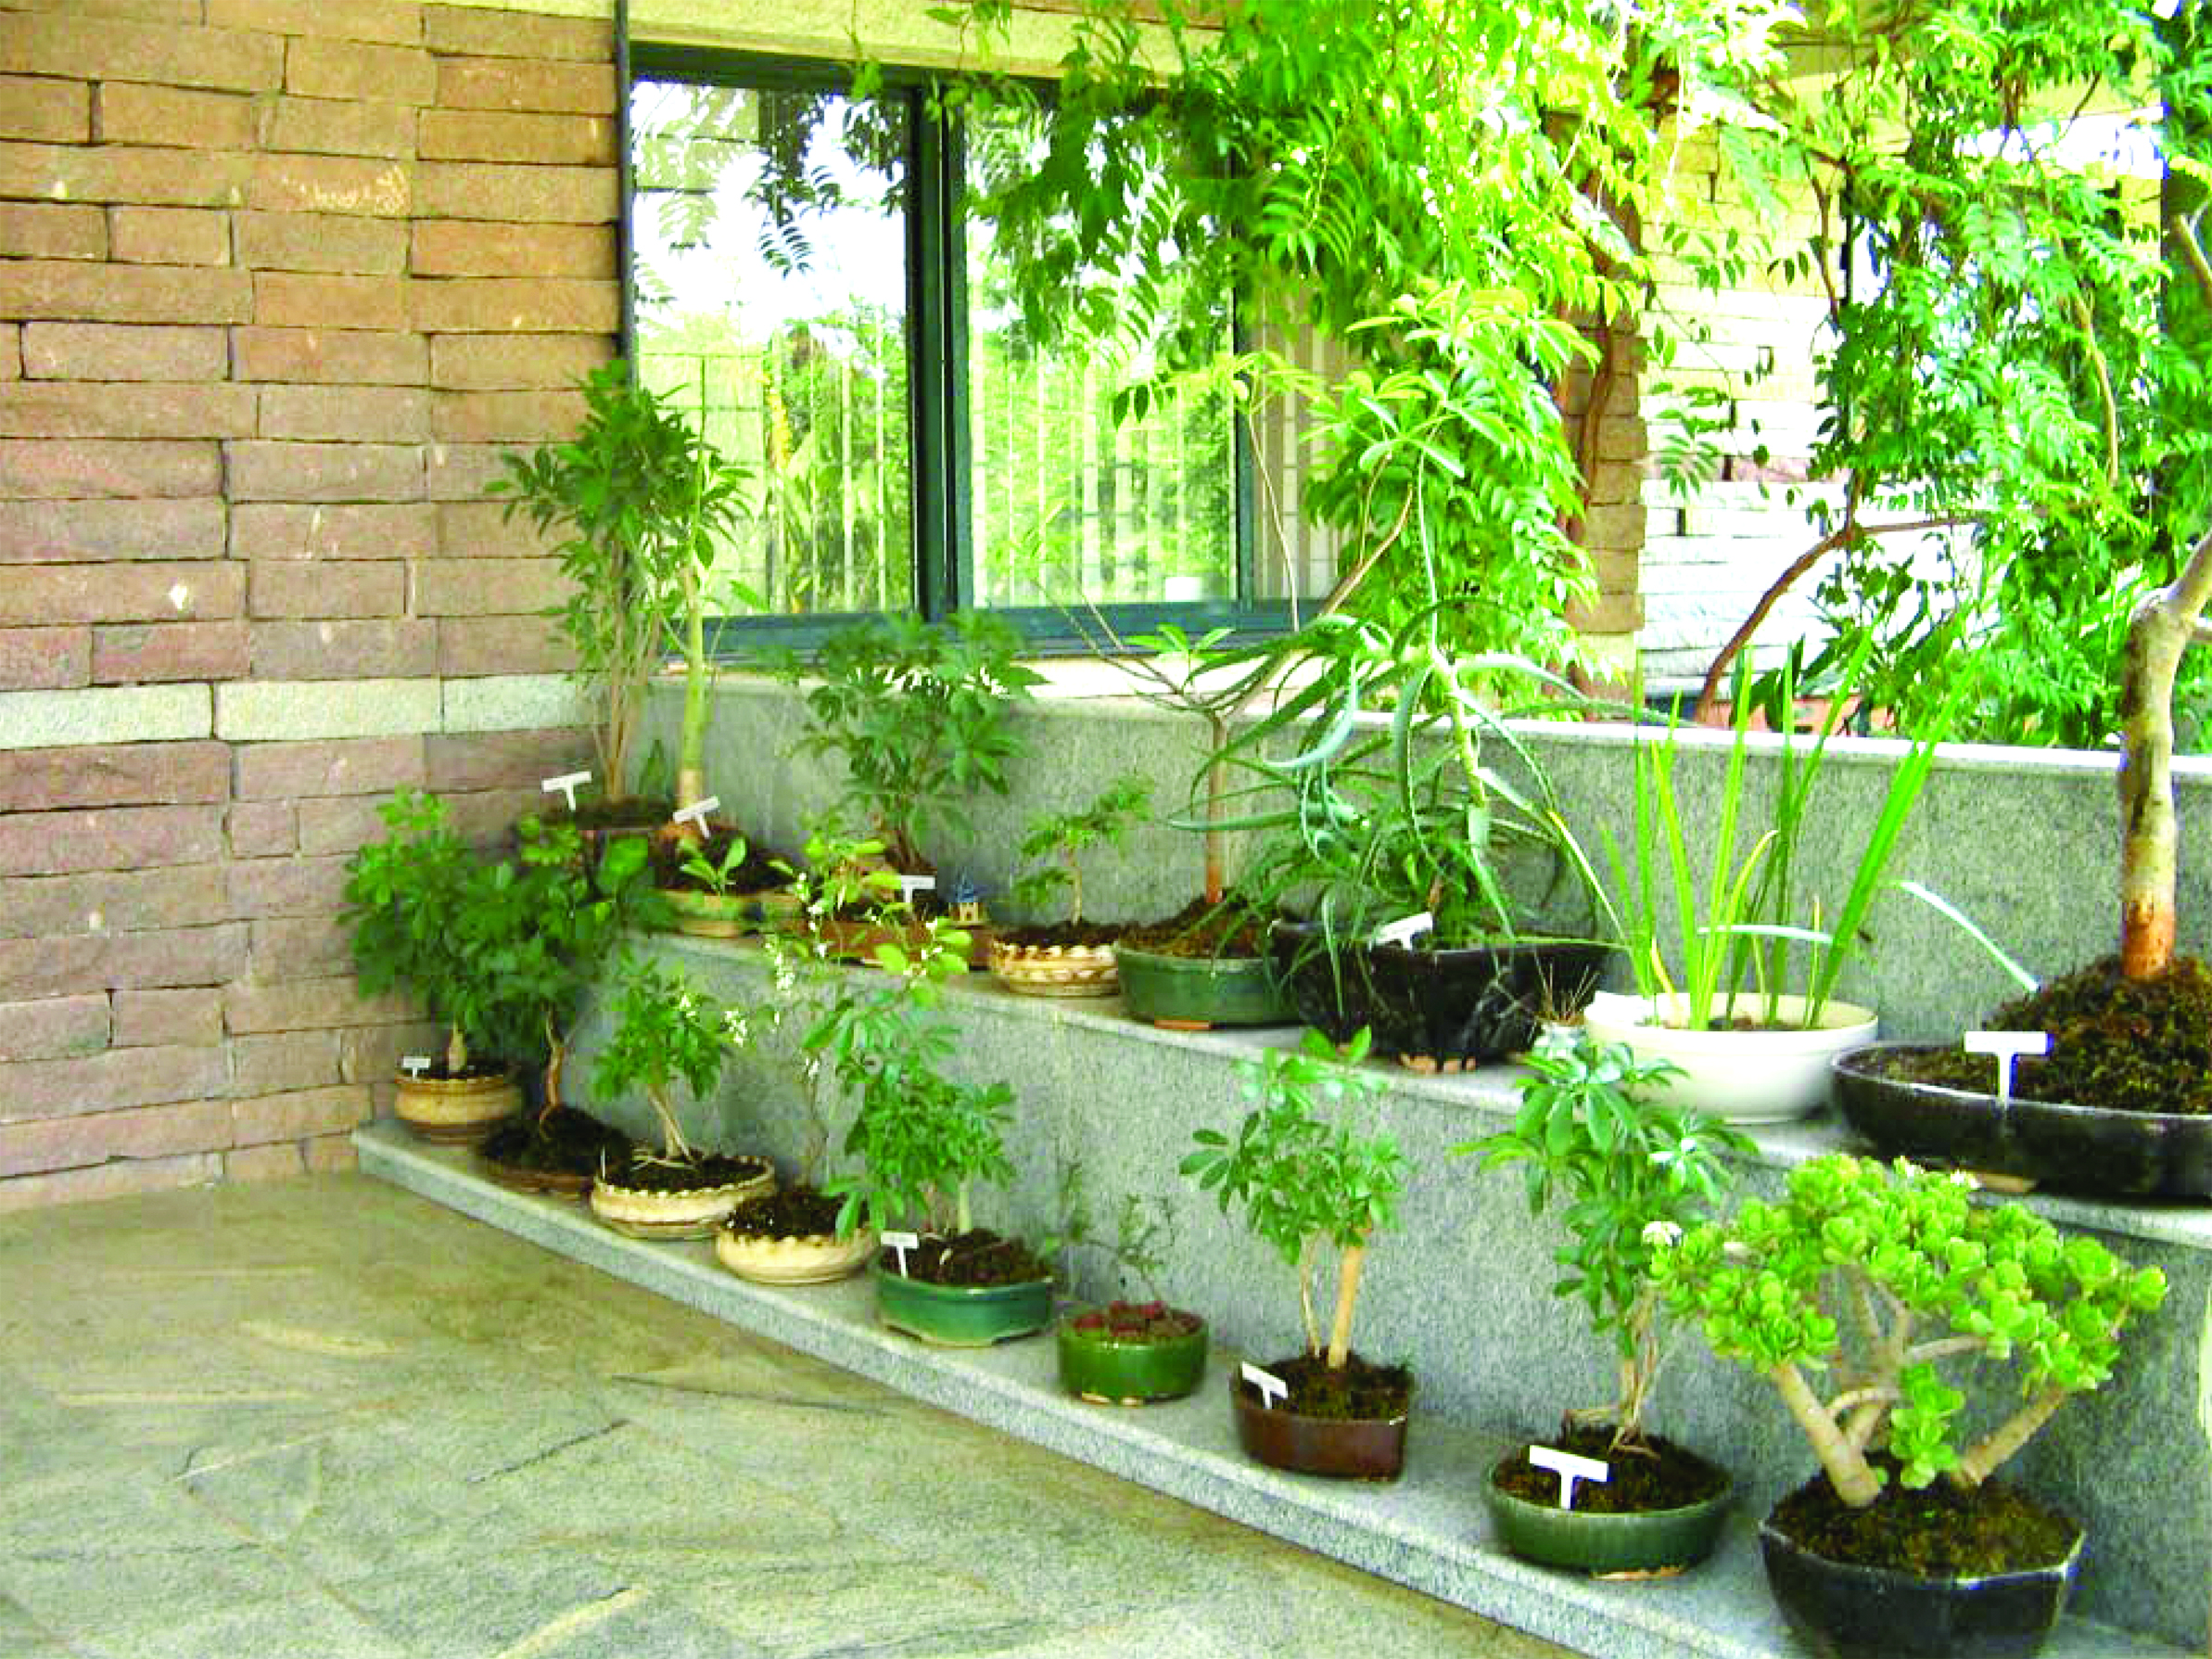 Amruth Home Garden is about a simple but innovative idea – to offer 